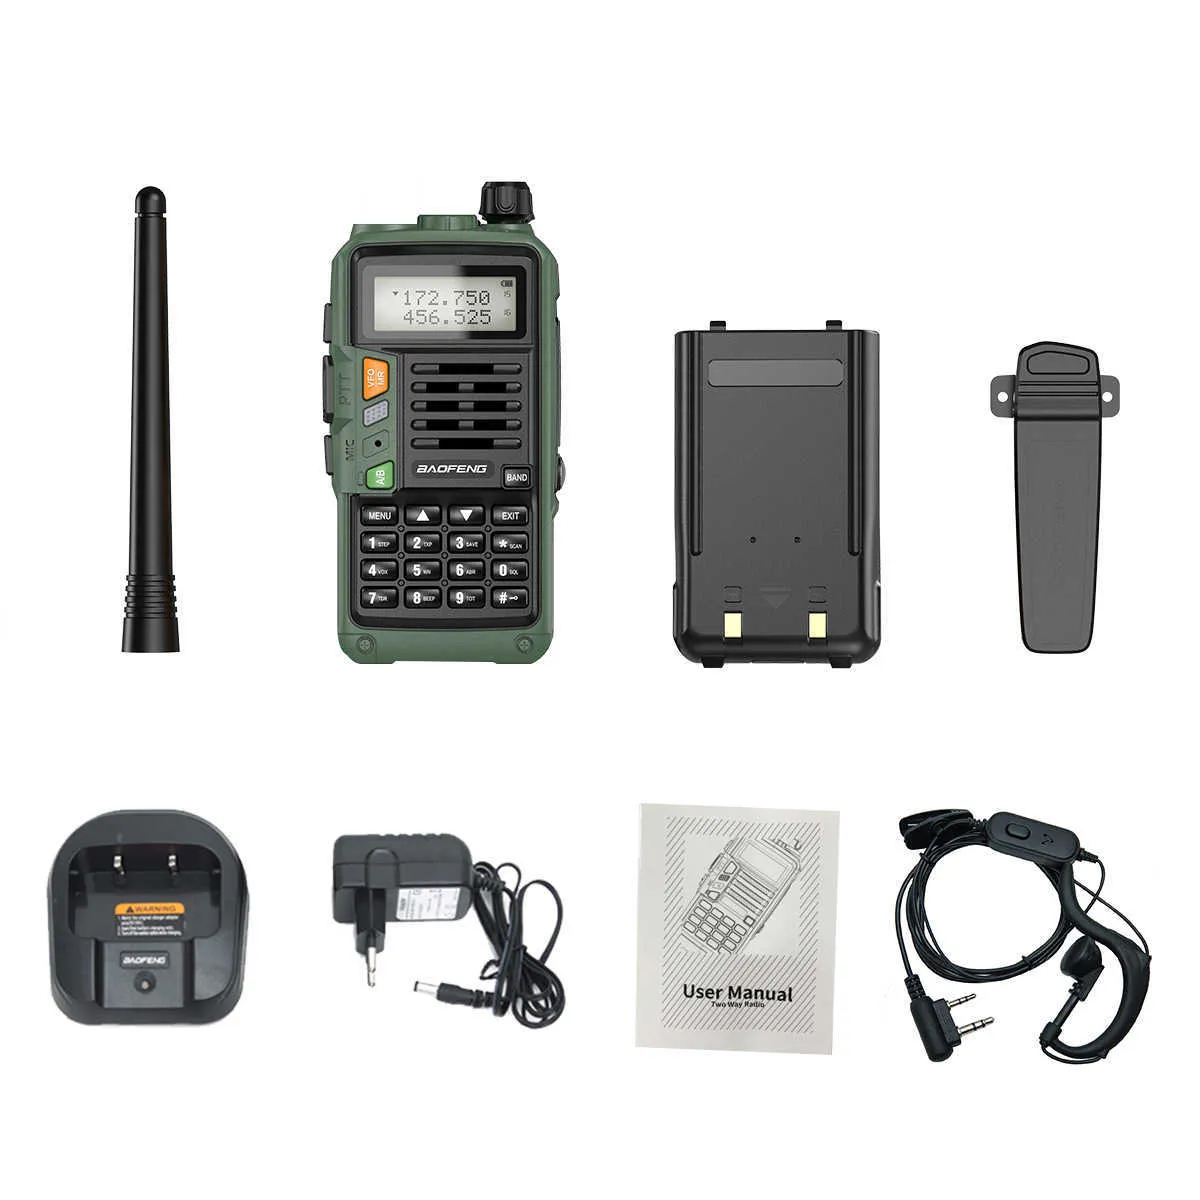 BaoFeng UVS9 Plus Powerful Walkie Talkie CB Radio Transceiver 10W 50 KM Long Range Portable For hunt forest upgrade 2108175682699